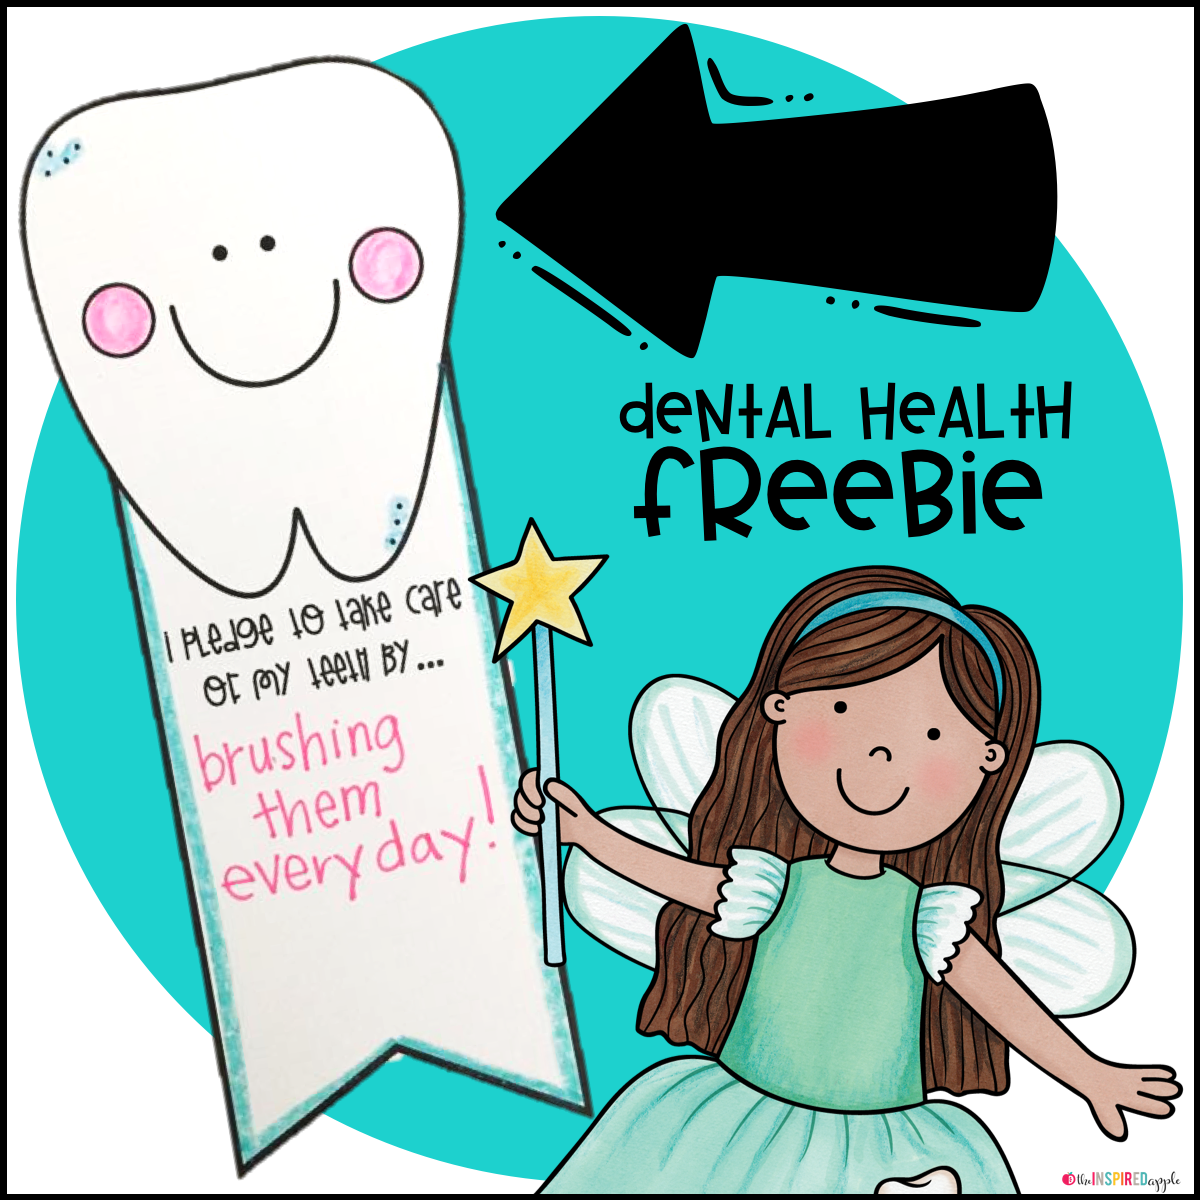 Celebrate Dental Health month with your kindergarten, first grade, and second grade students with this fun free activity! Students cut out the badge, fill out the pledge, and then they can proudly display them around their necks on a piece of yarn, pinned to their shirts, or on a poster in your hallway! Easy, free, and FUN!